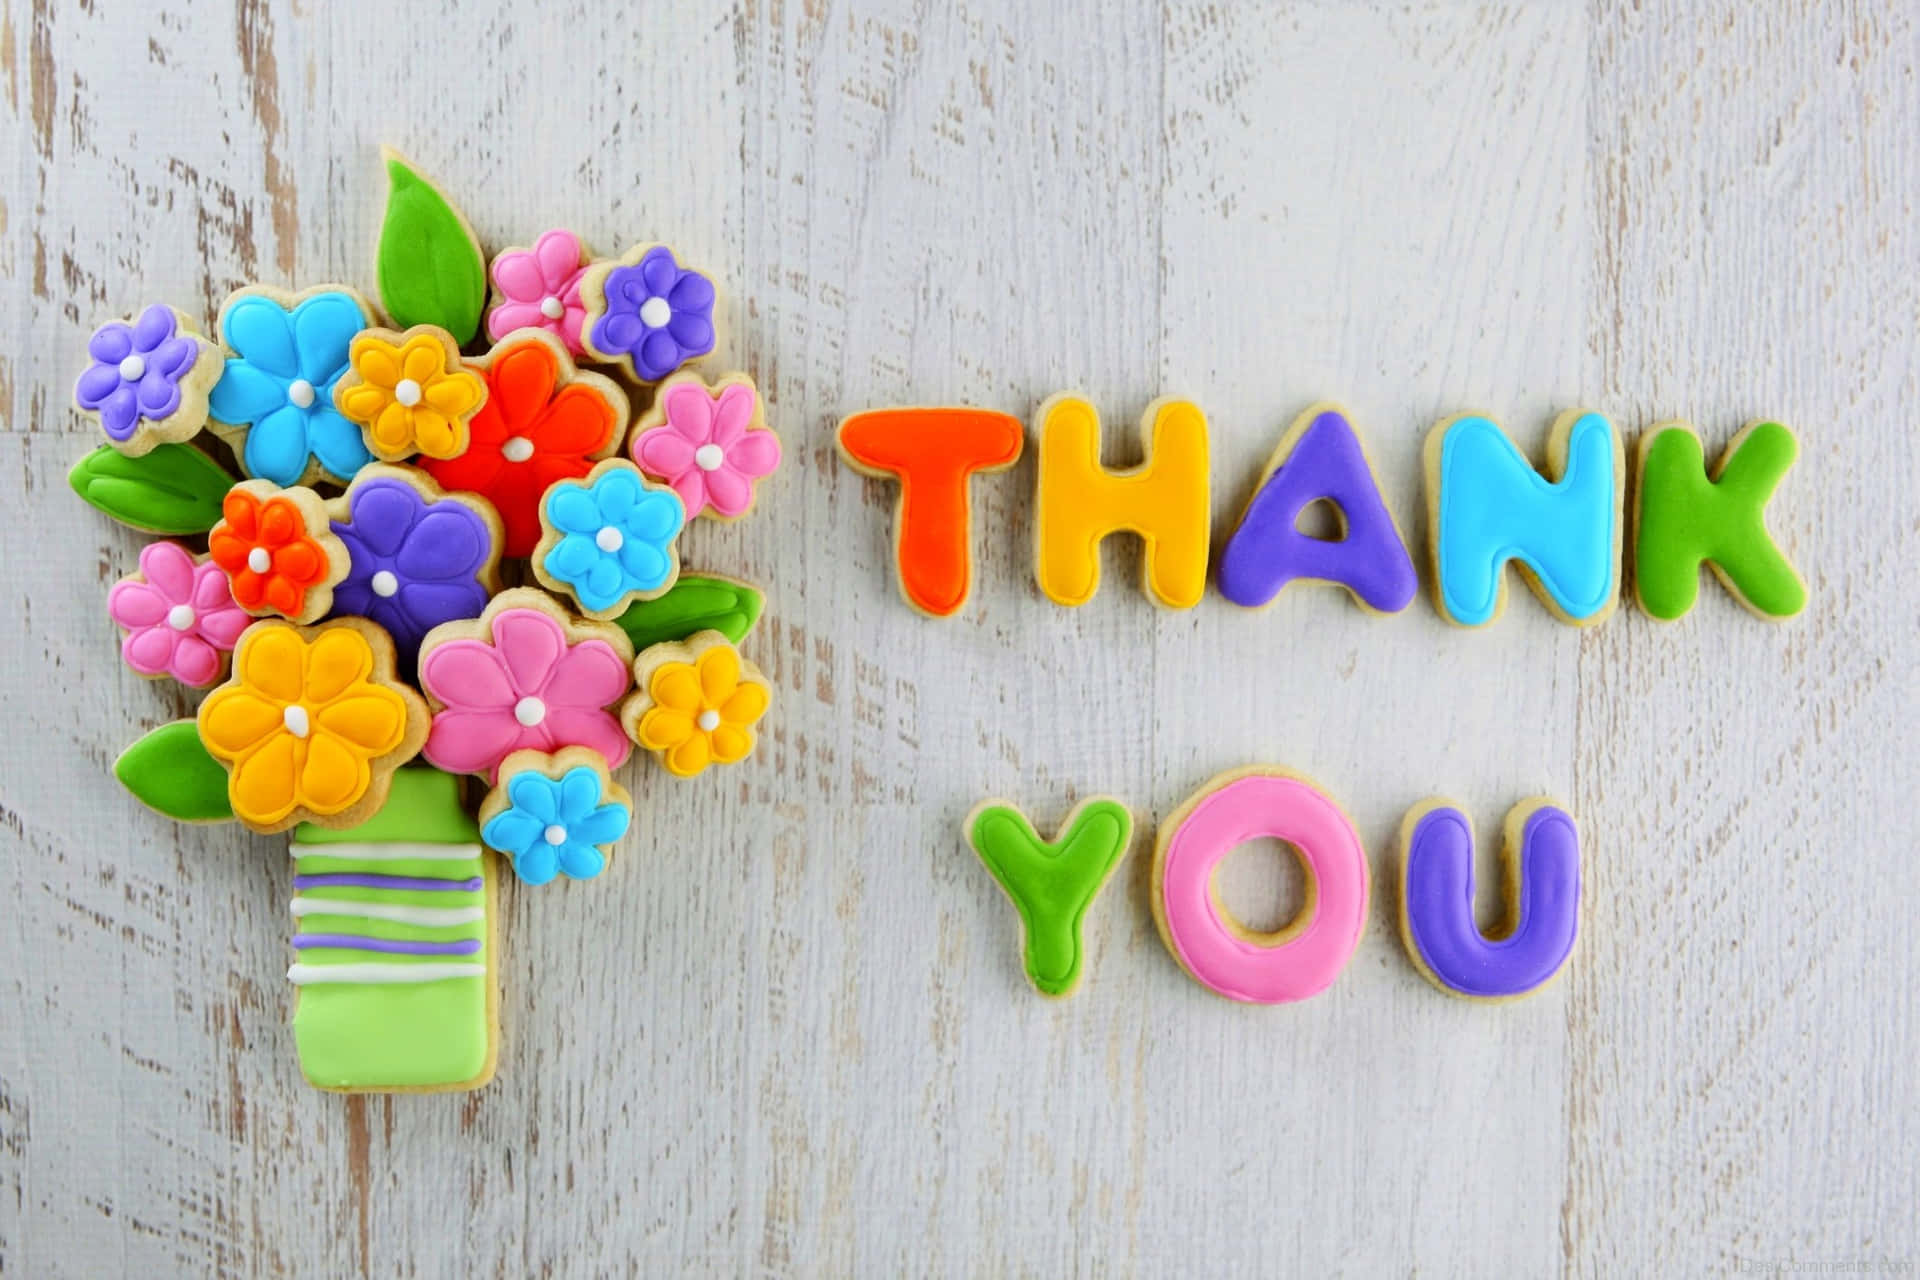 Thank You Background Image in Floral Style